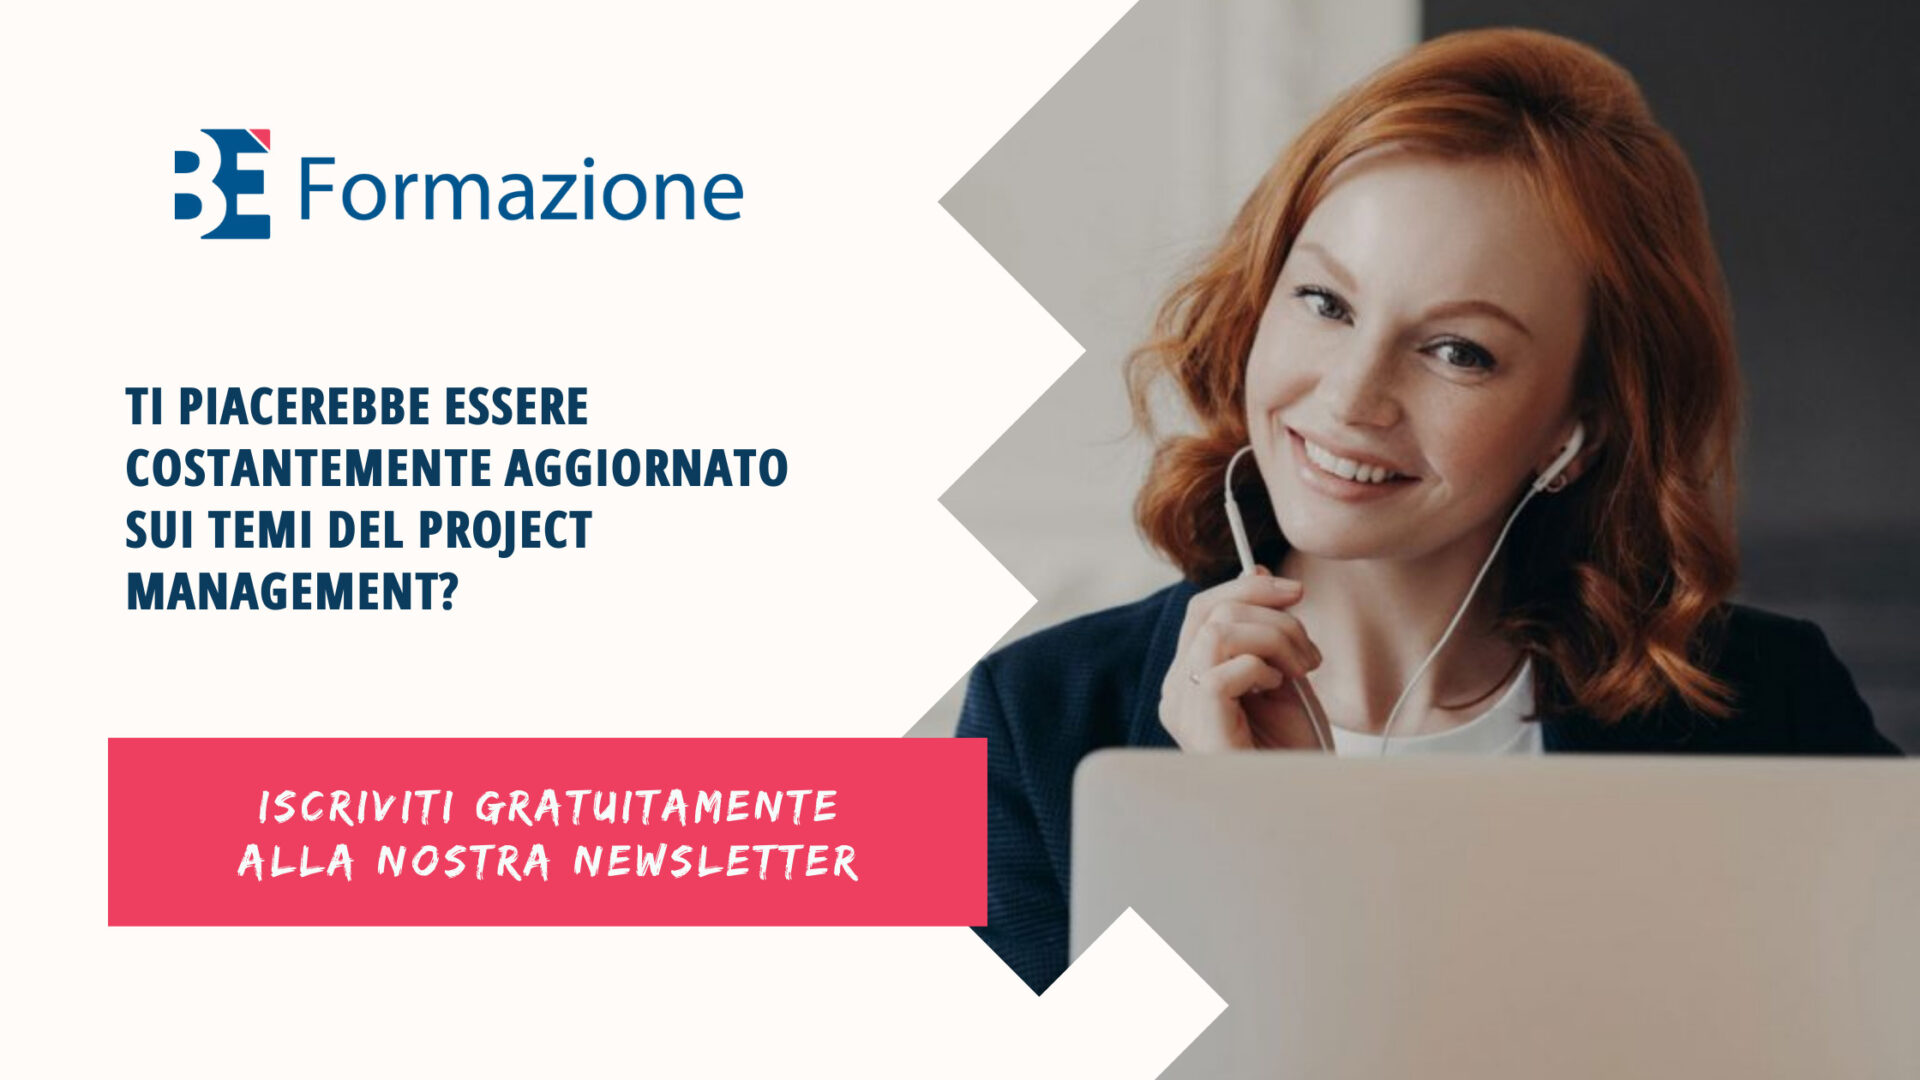 Diventare project manager